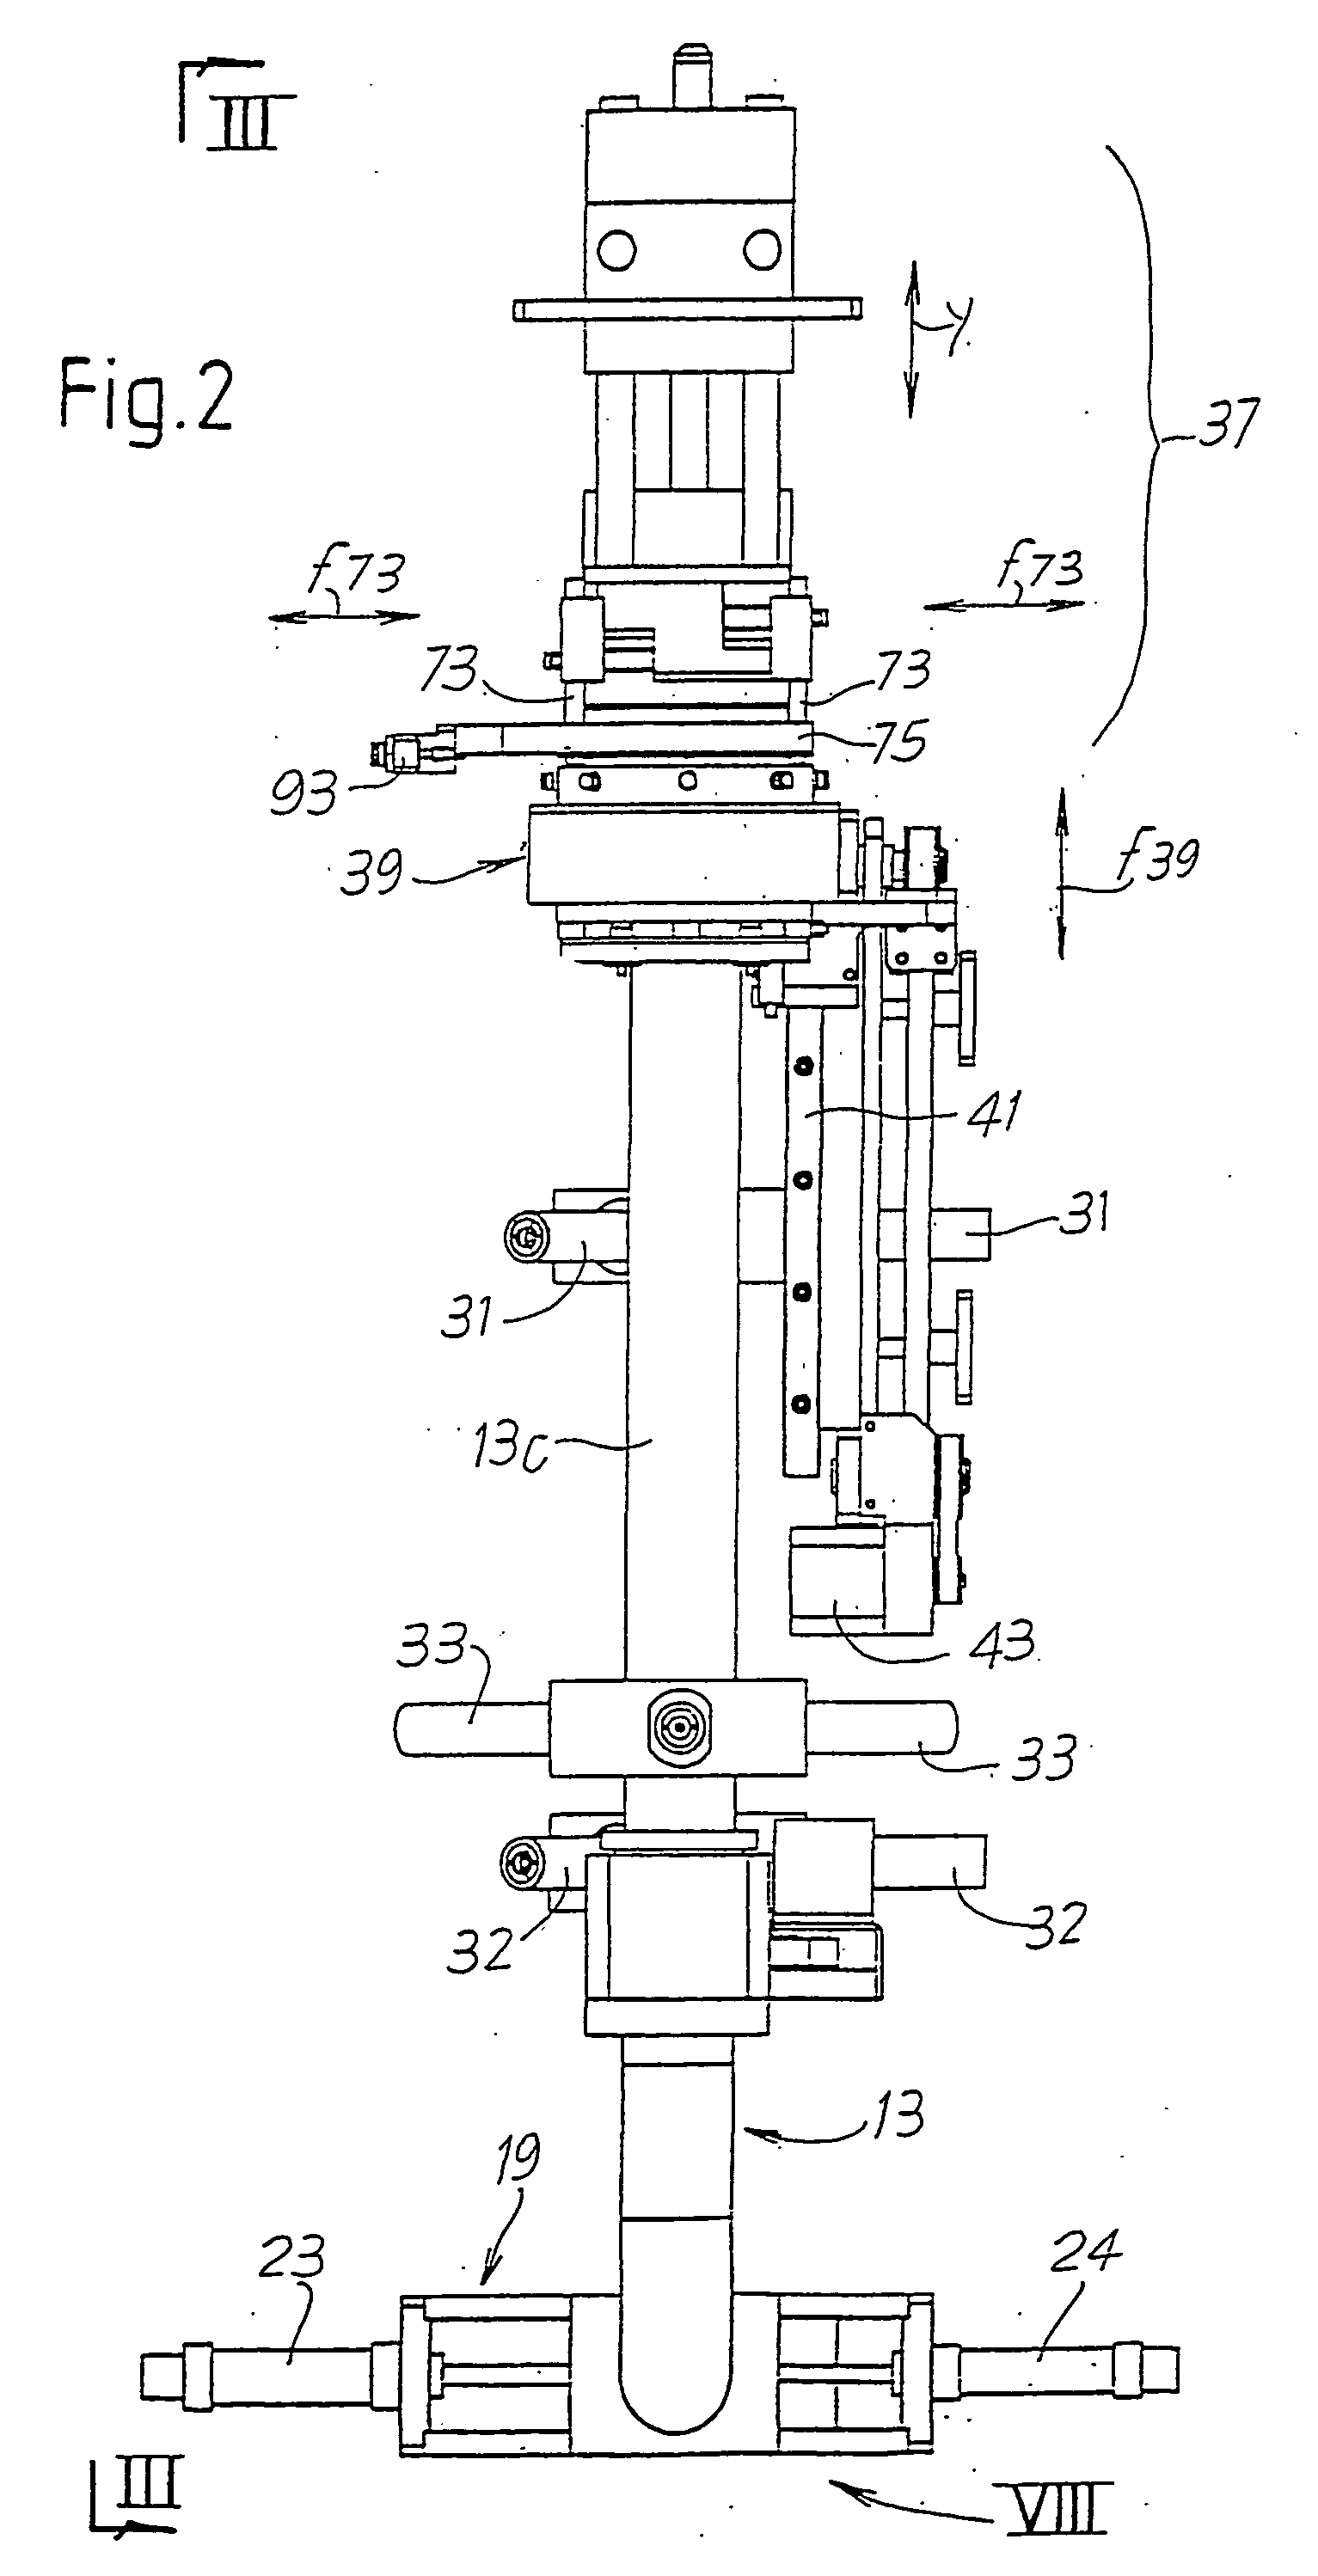 Method and device for the production of tubular knitted articles and in particular for closing the toe